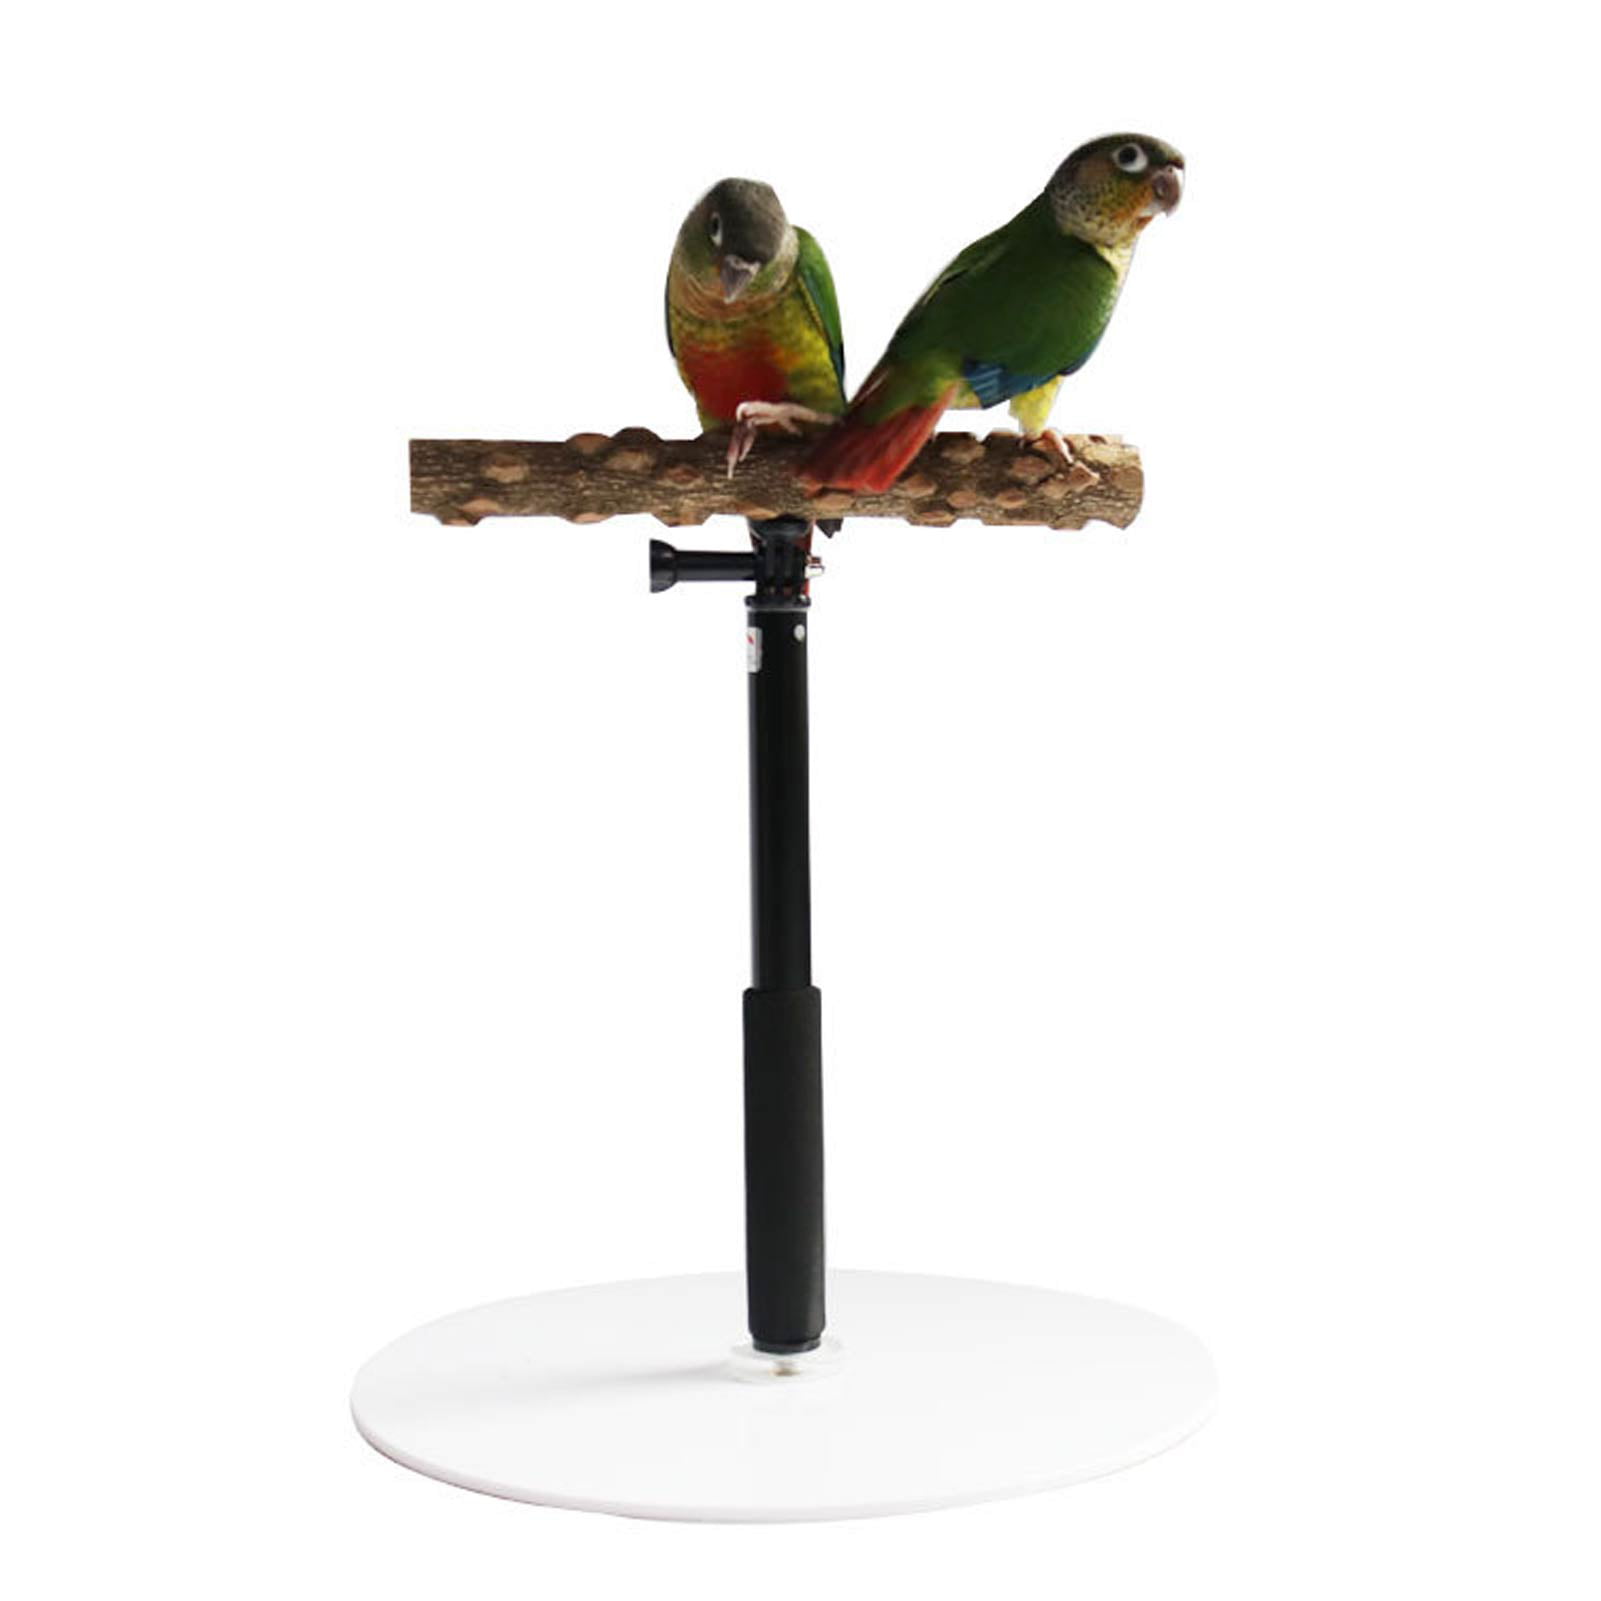 PIVBY Bird Stand Perch Wooden Parrot Cage Training Playstand Toys for Concures Parakeets Lovebirds Cockatiels 